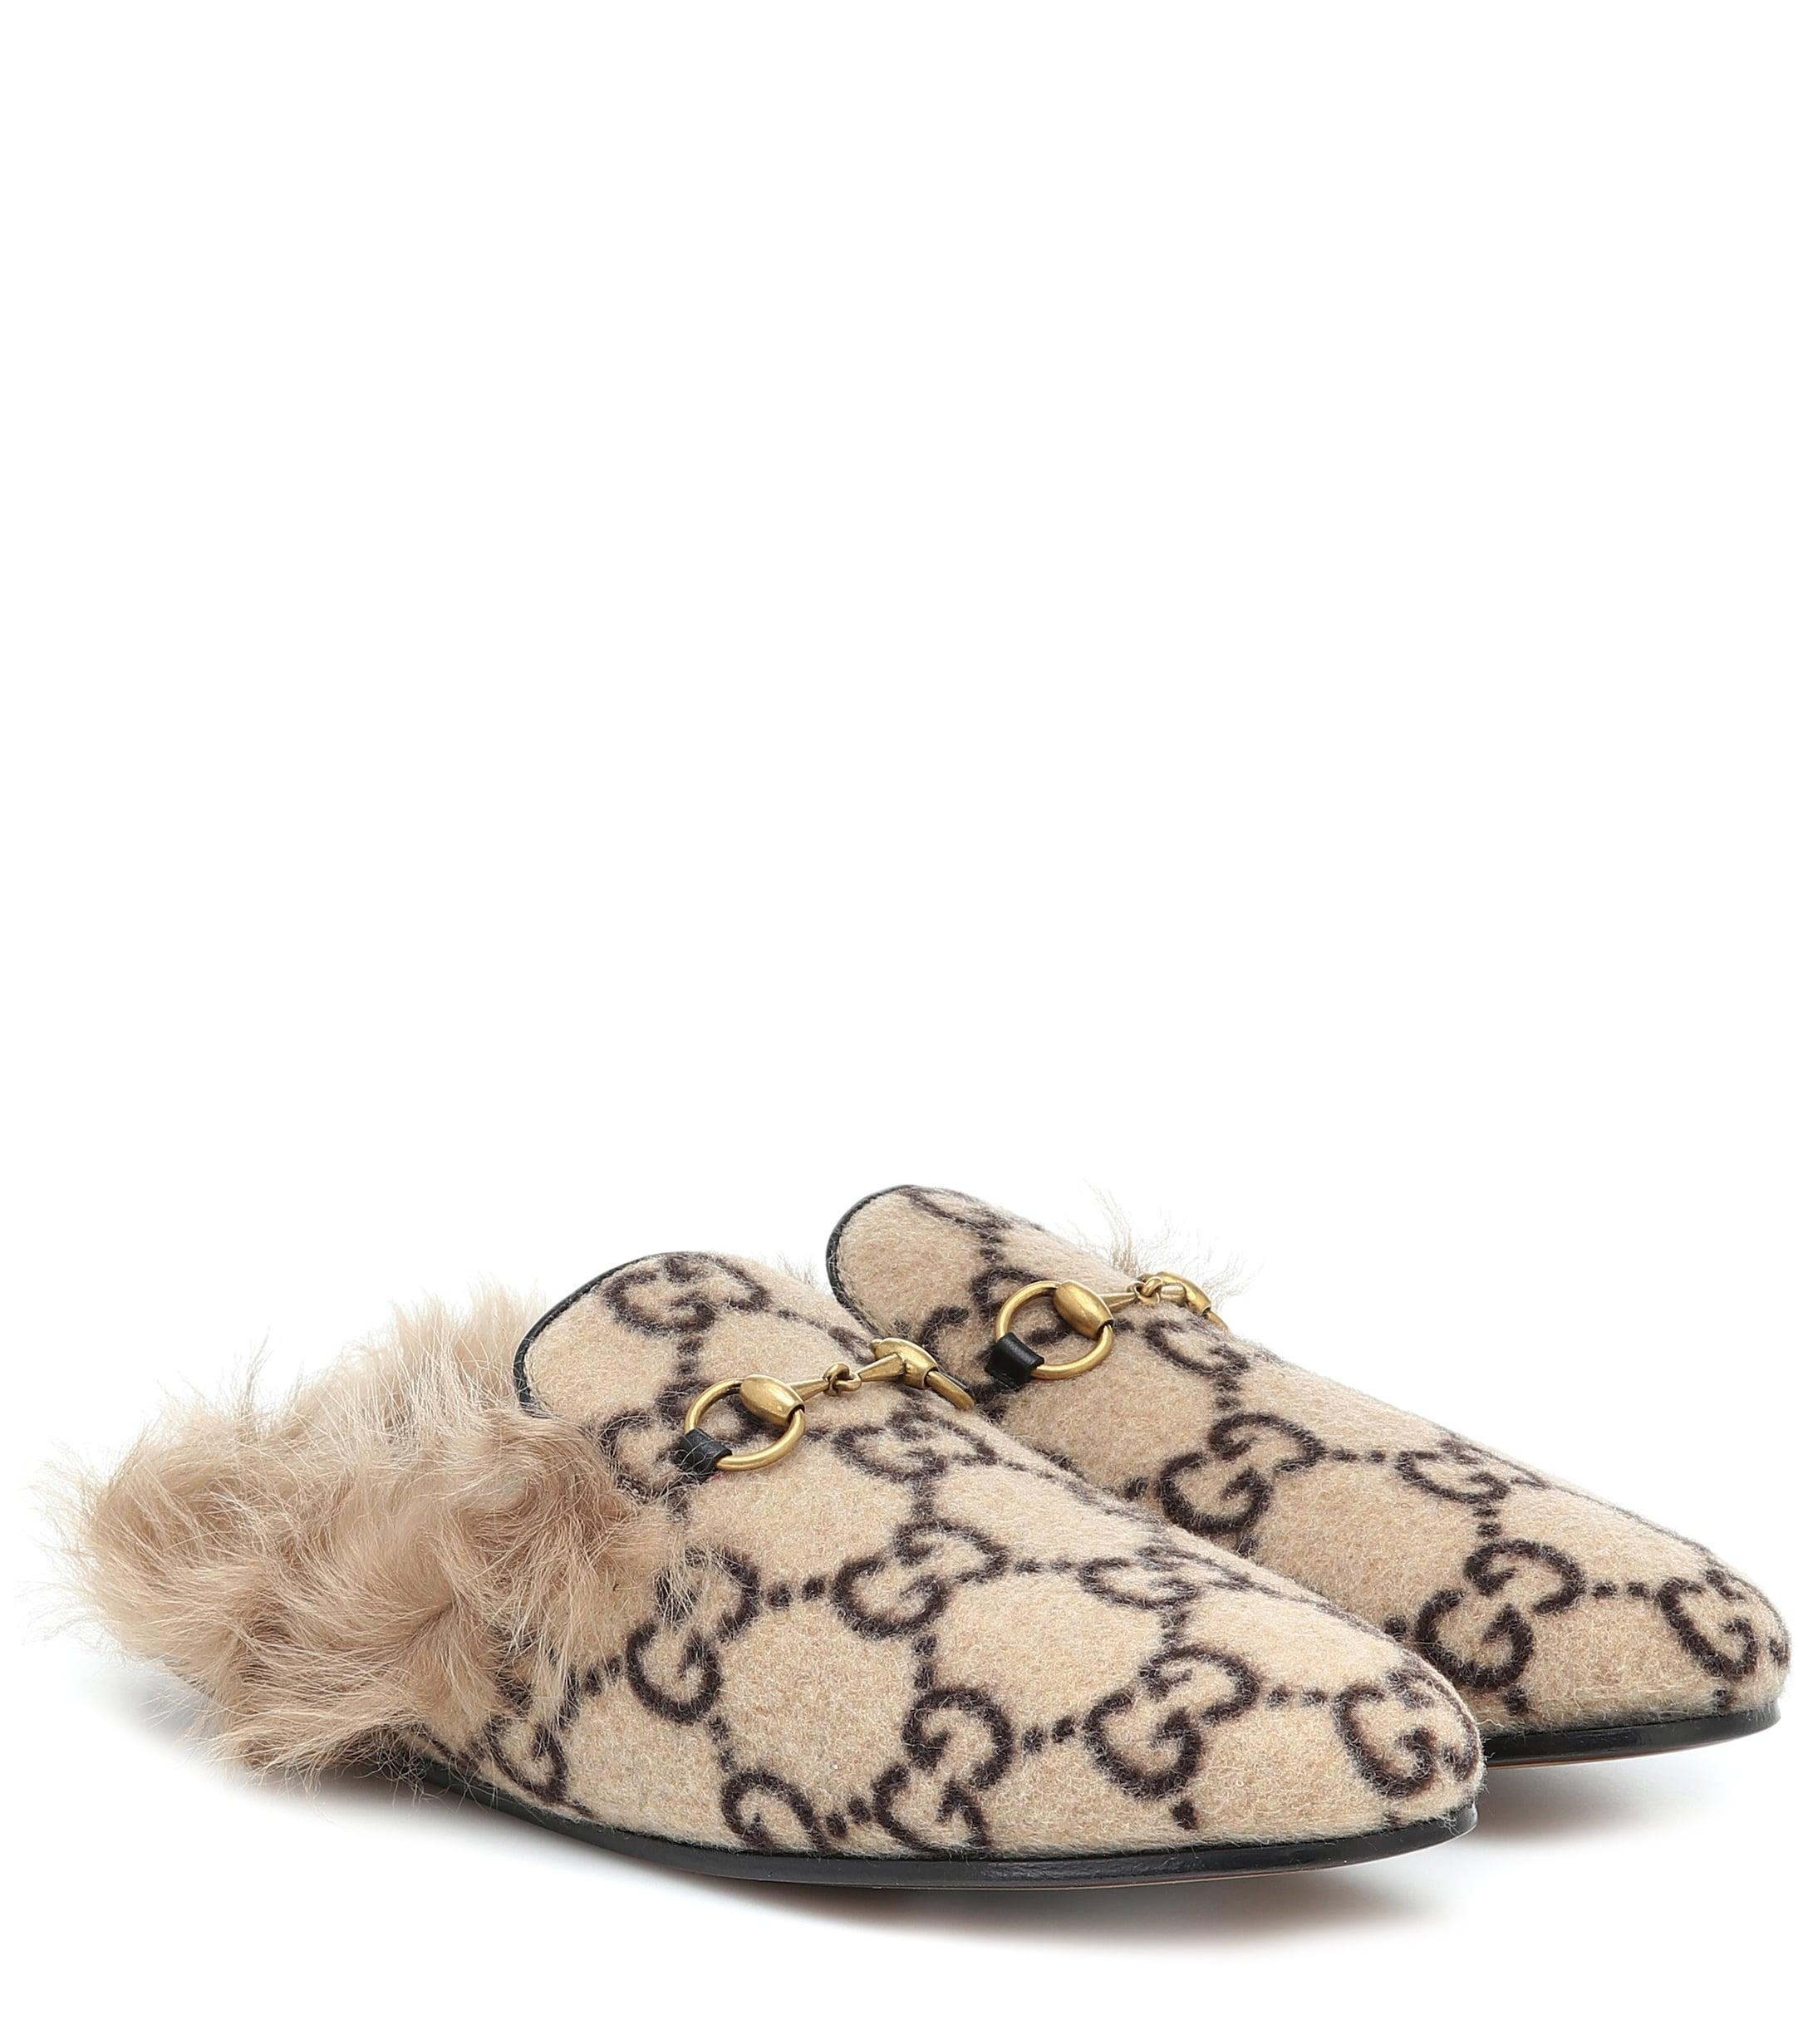 Gucci Princetown Shearling-lined Slippers in Natural | Lyst